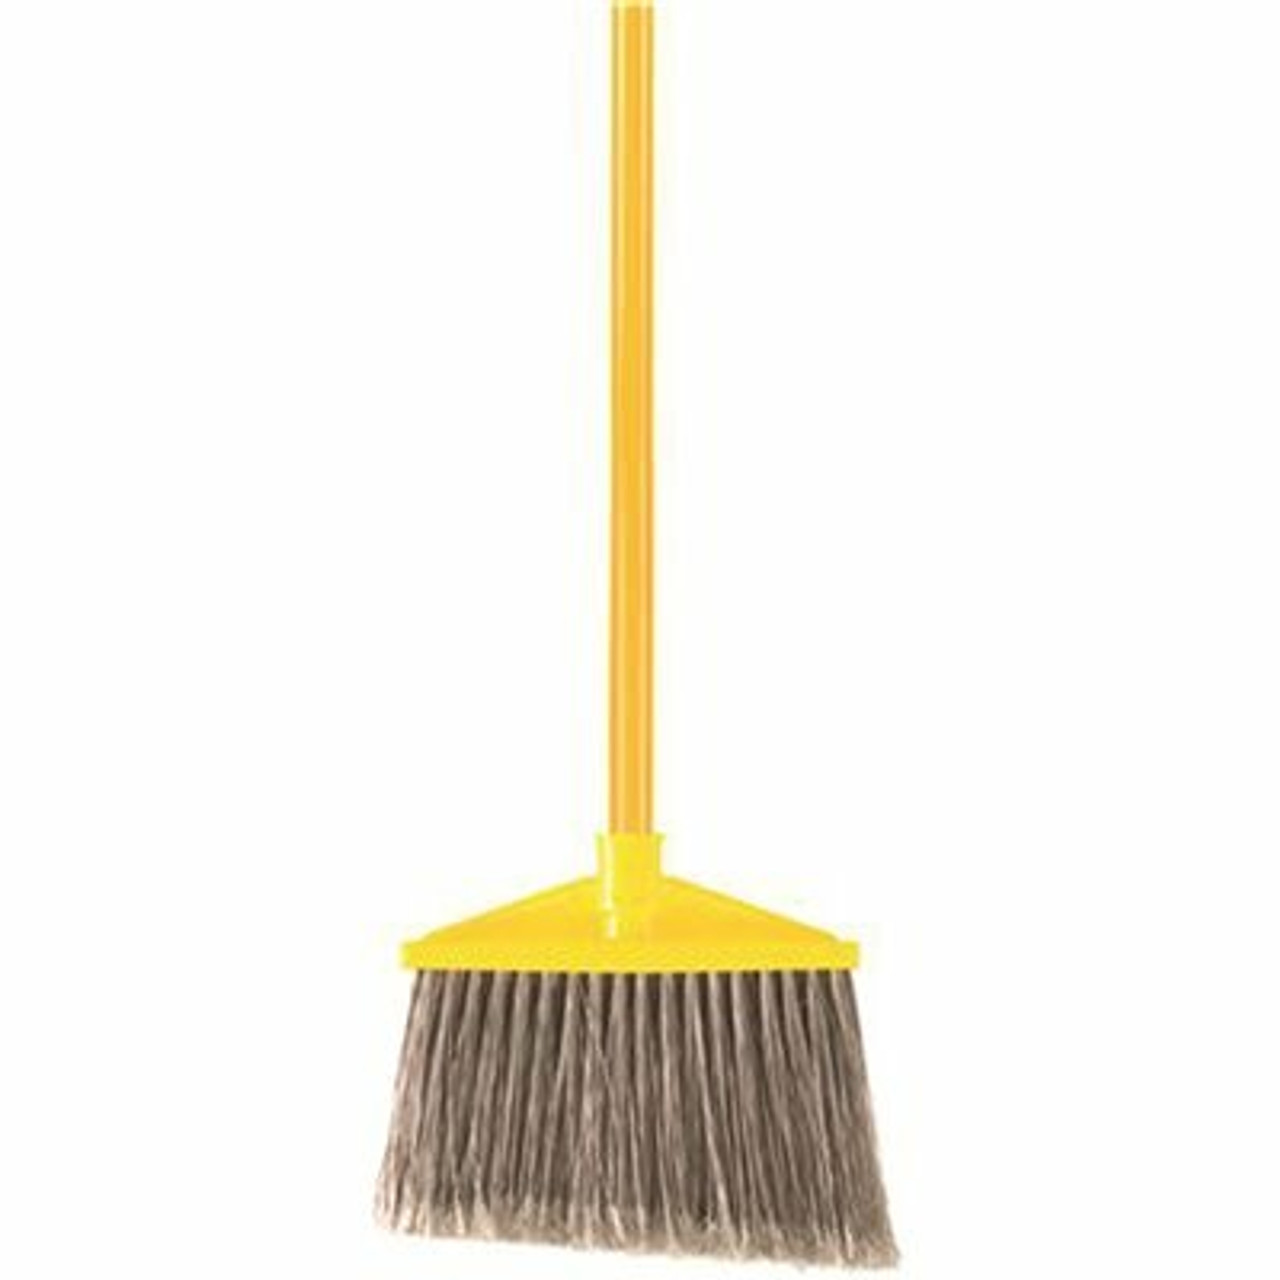 Rubbermaid Commercial Products 10.5 In. Polypropylene Upright Broom With Vinyl Coated Metal Handle